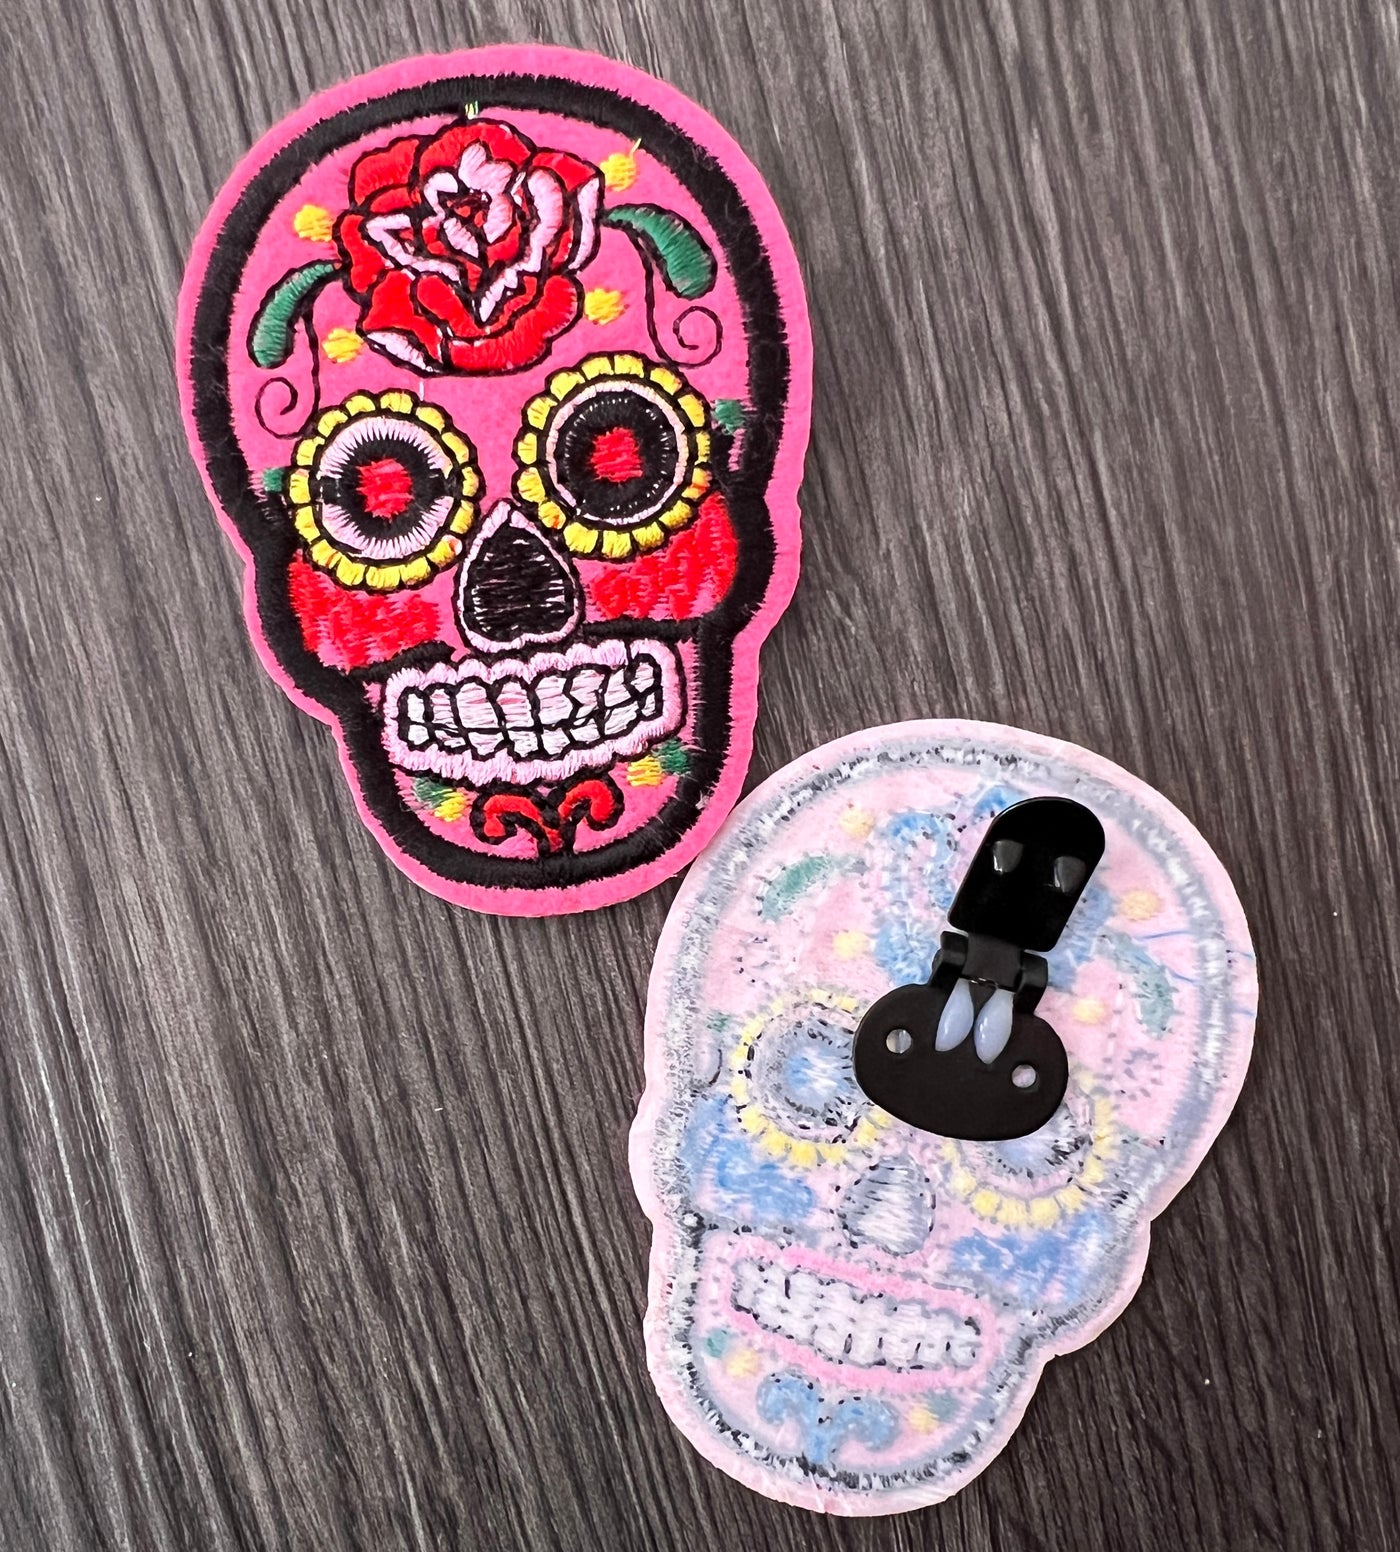 Popping Candy Shoe Clips - Sugar Skulls